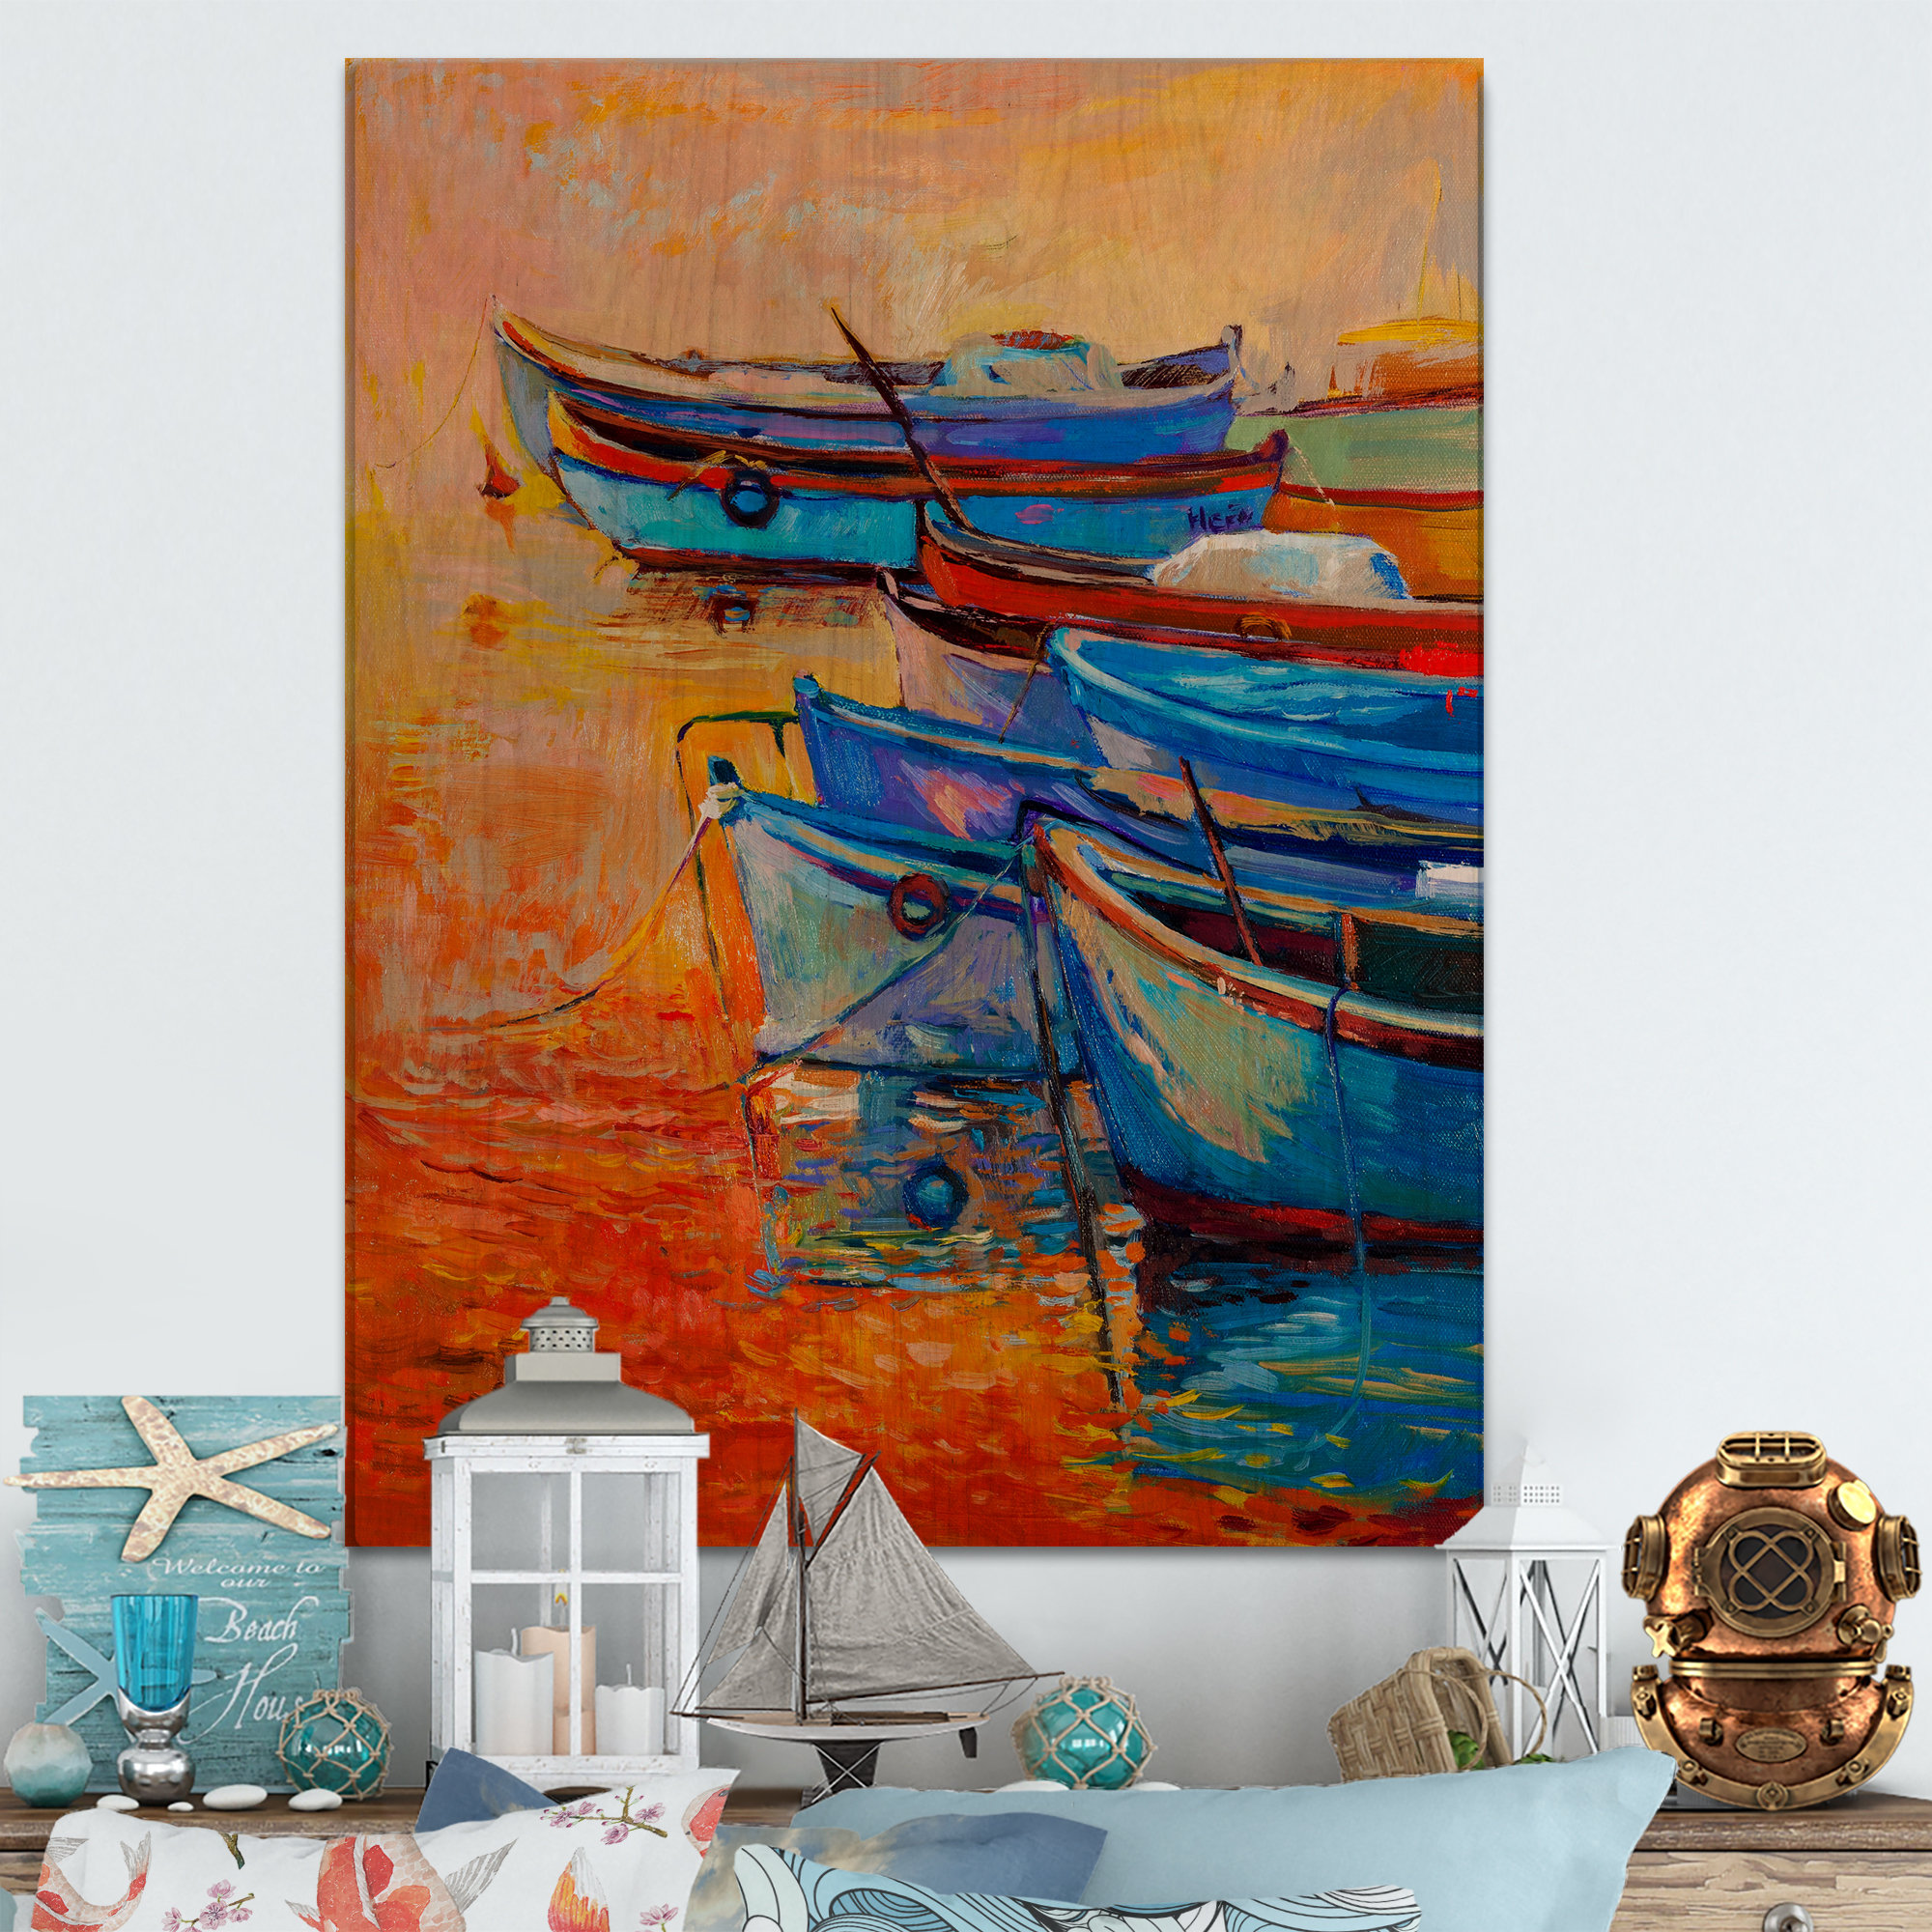 Bless international  Boats Resting On The Water During Warm Sunset VIII   Painting on Canvas